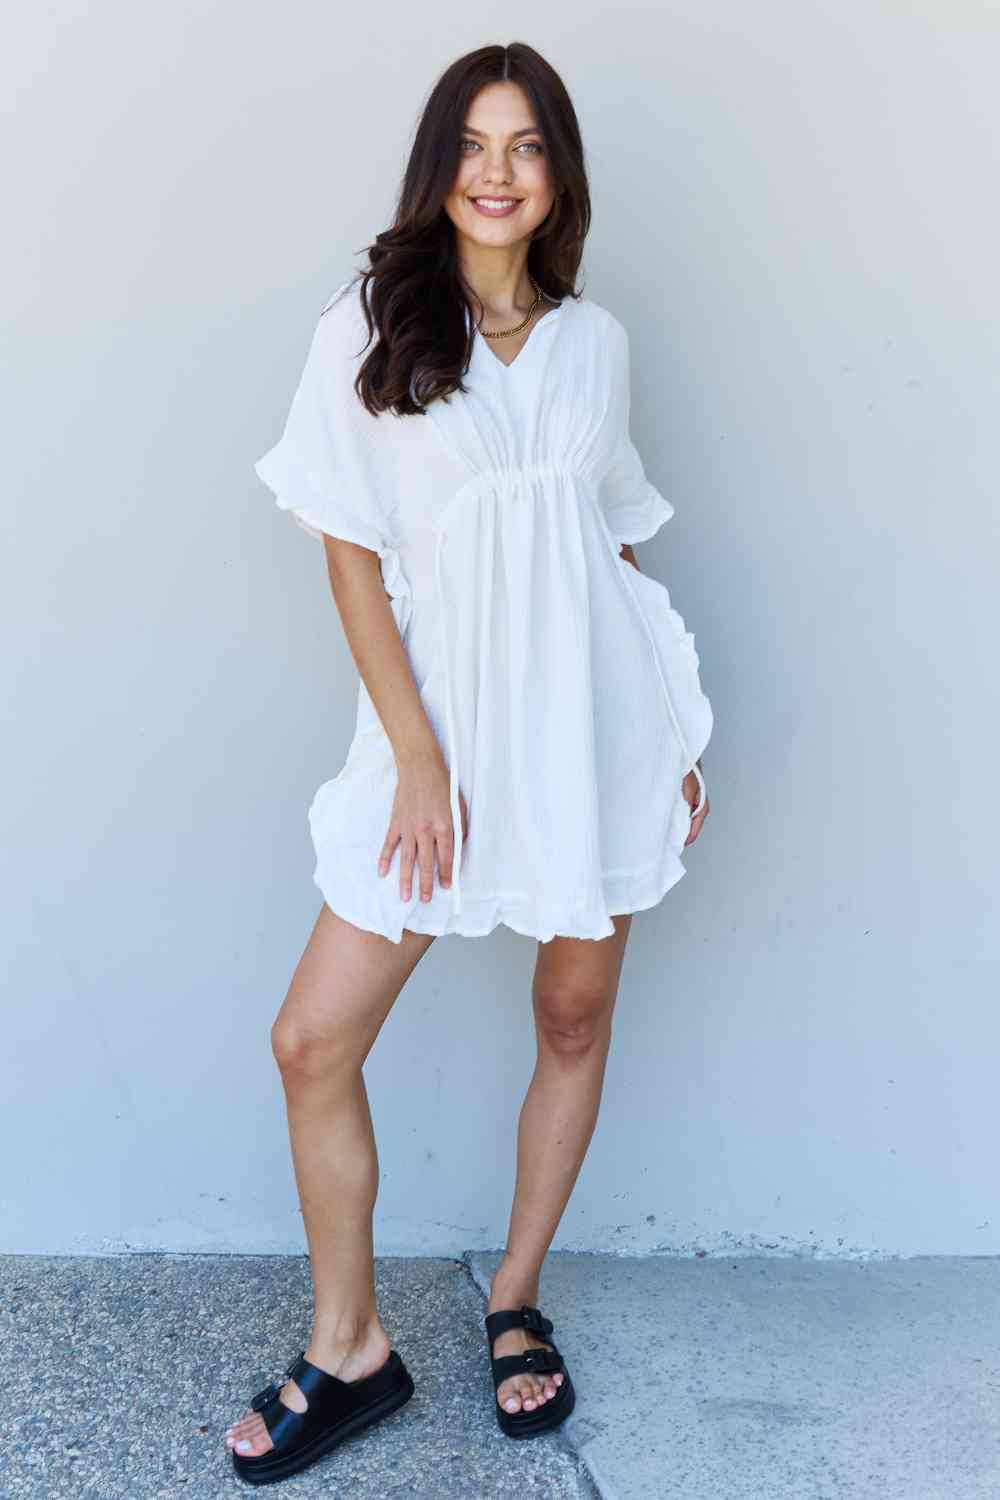 Ninexis Out Of Time Full Size Ruffle Hem Dress with Drawstring Waistband in White No 4